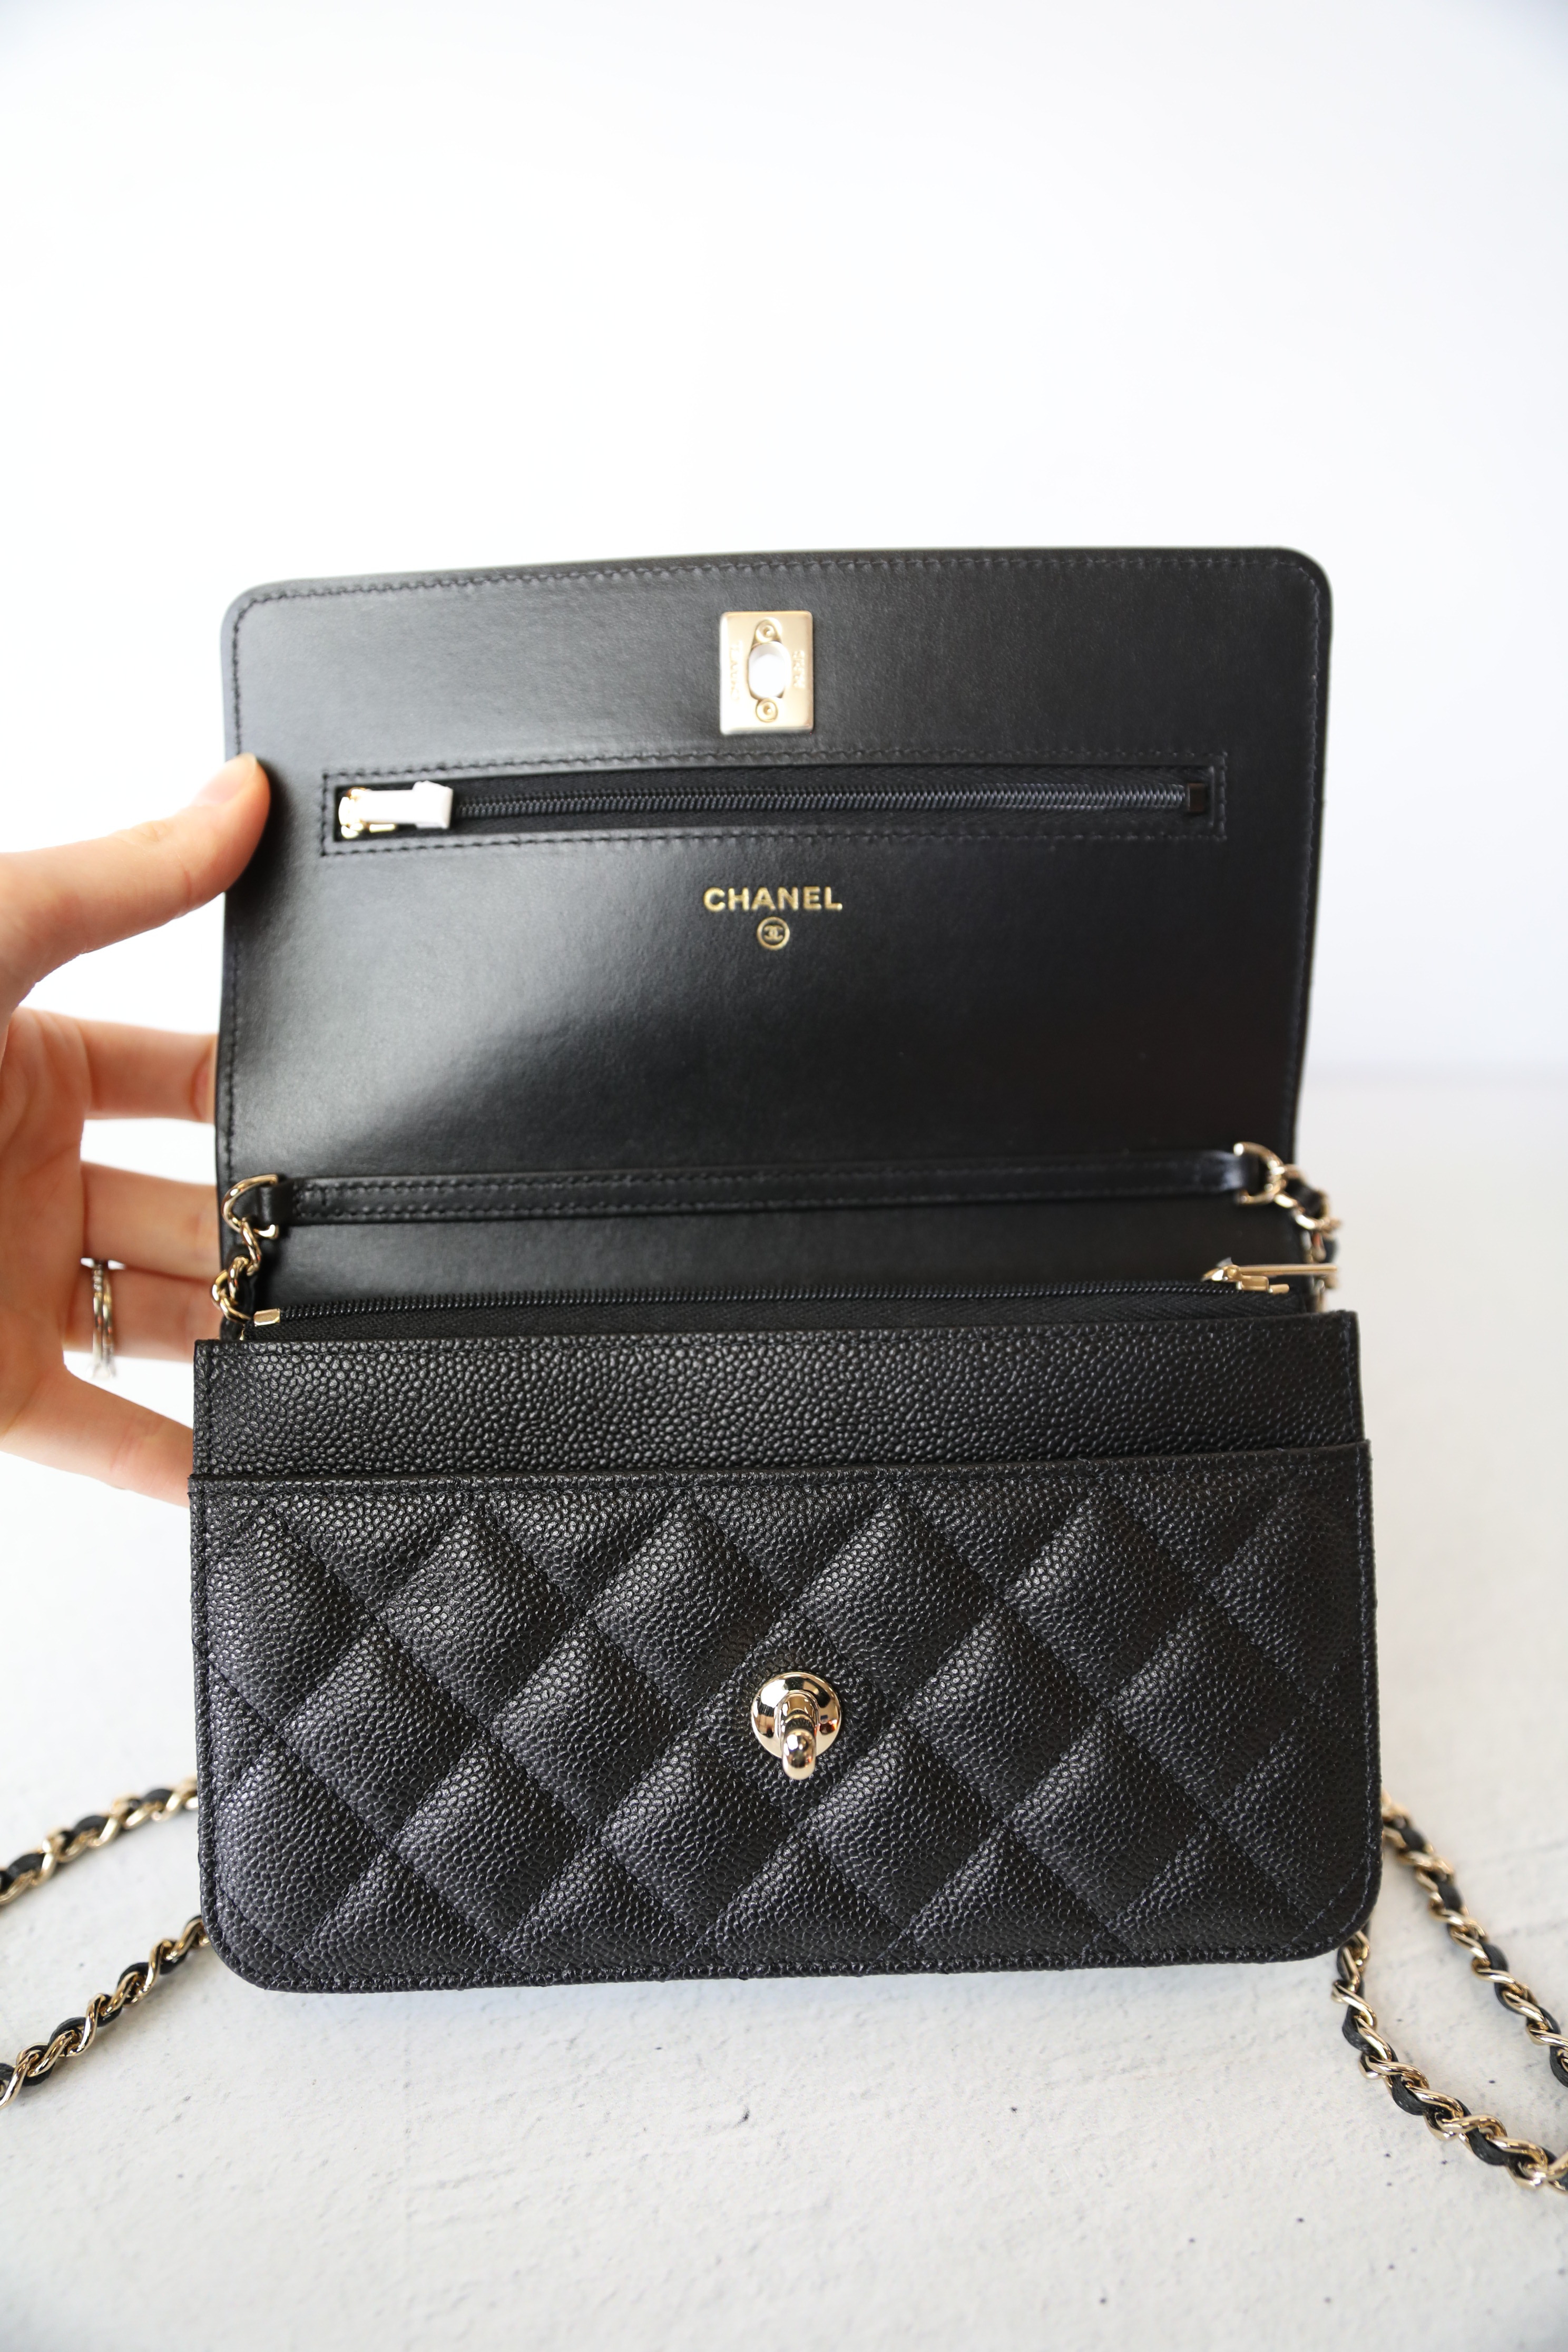 Chanel Turnlock Bow Wallet on Chain, Black Caviar with Gold Hardware, New  in Box WA001 - Julia Rose Boston